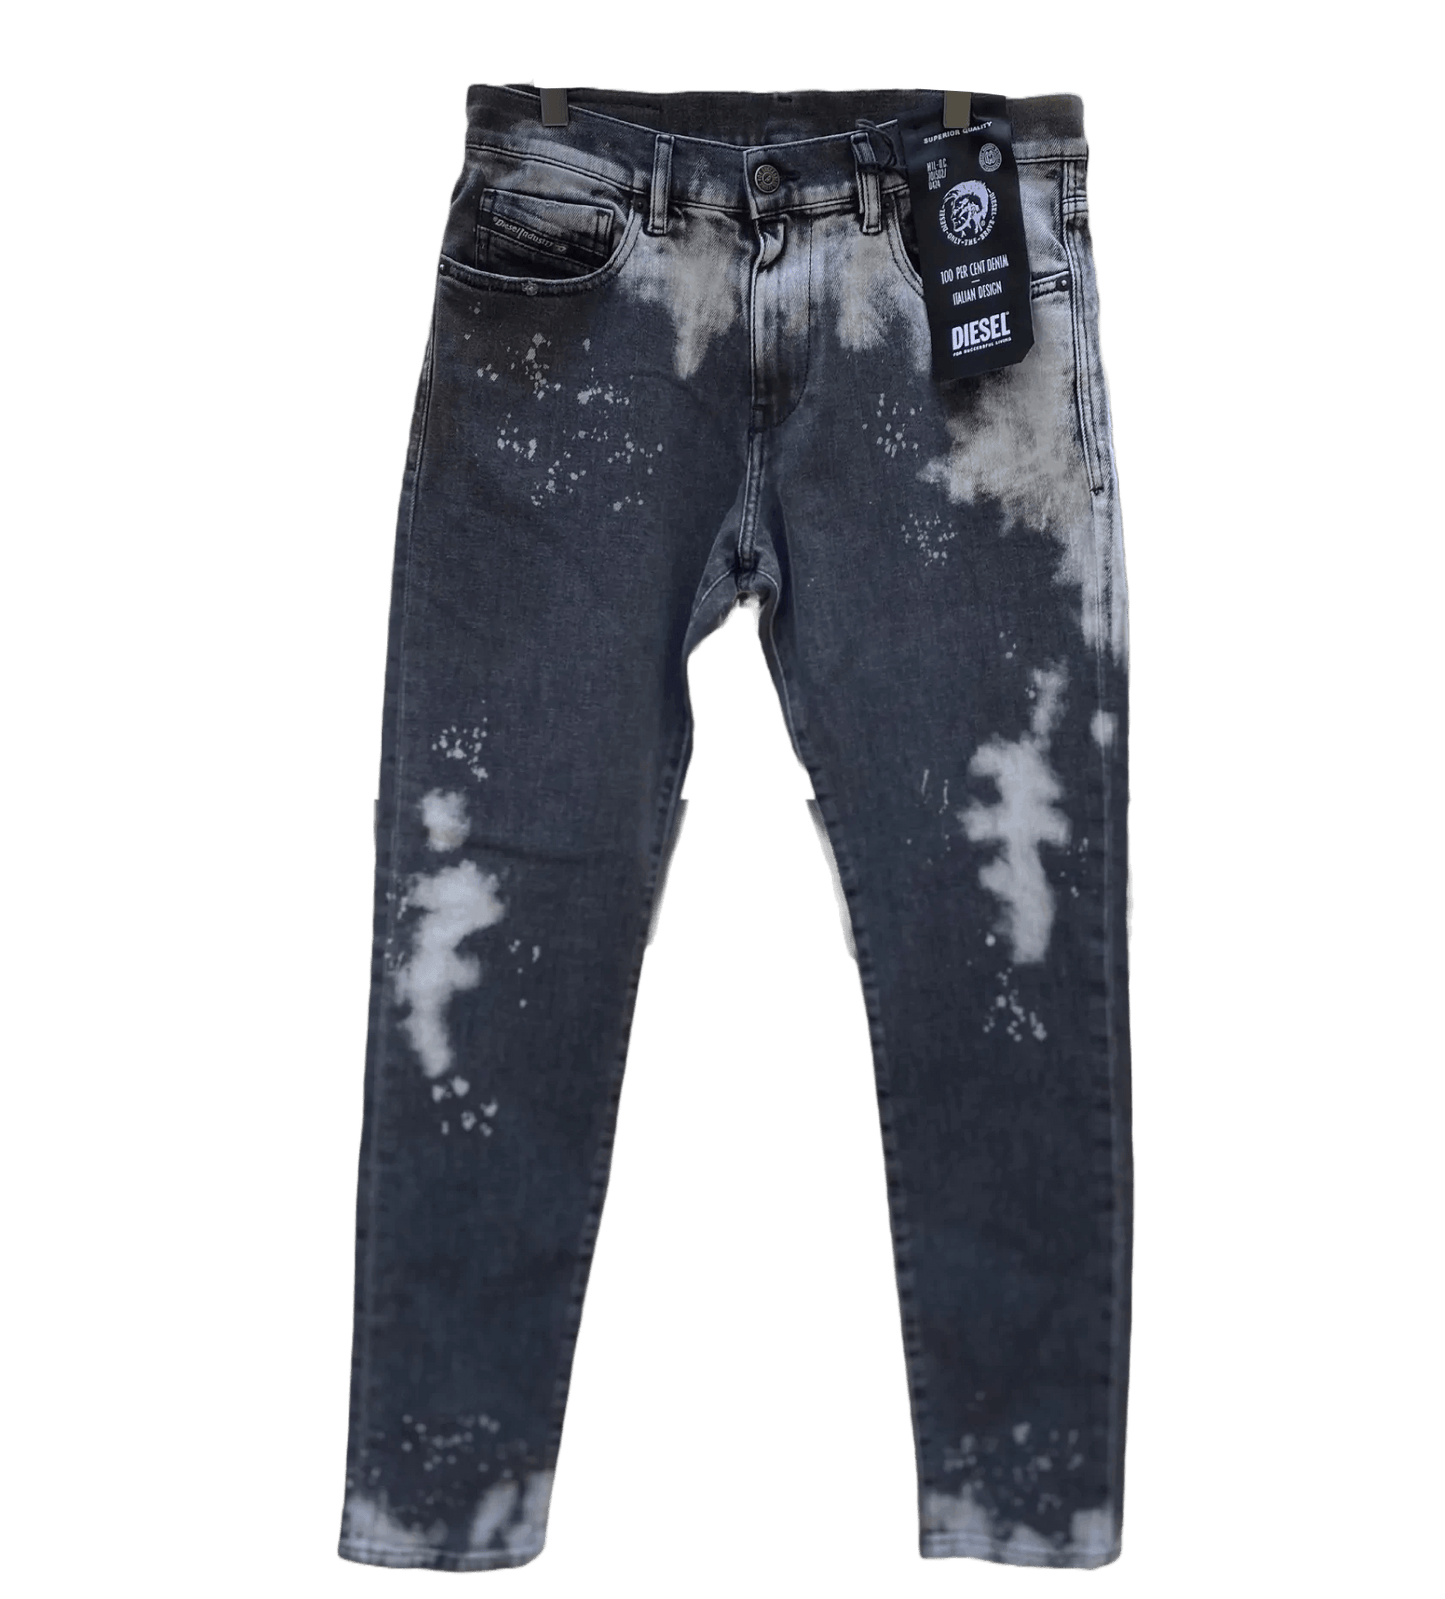 A pair of black and grey faded DIESEL D-STRUKT-SP17 09RE jeans with splatters on them.